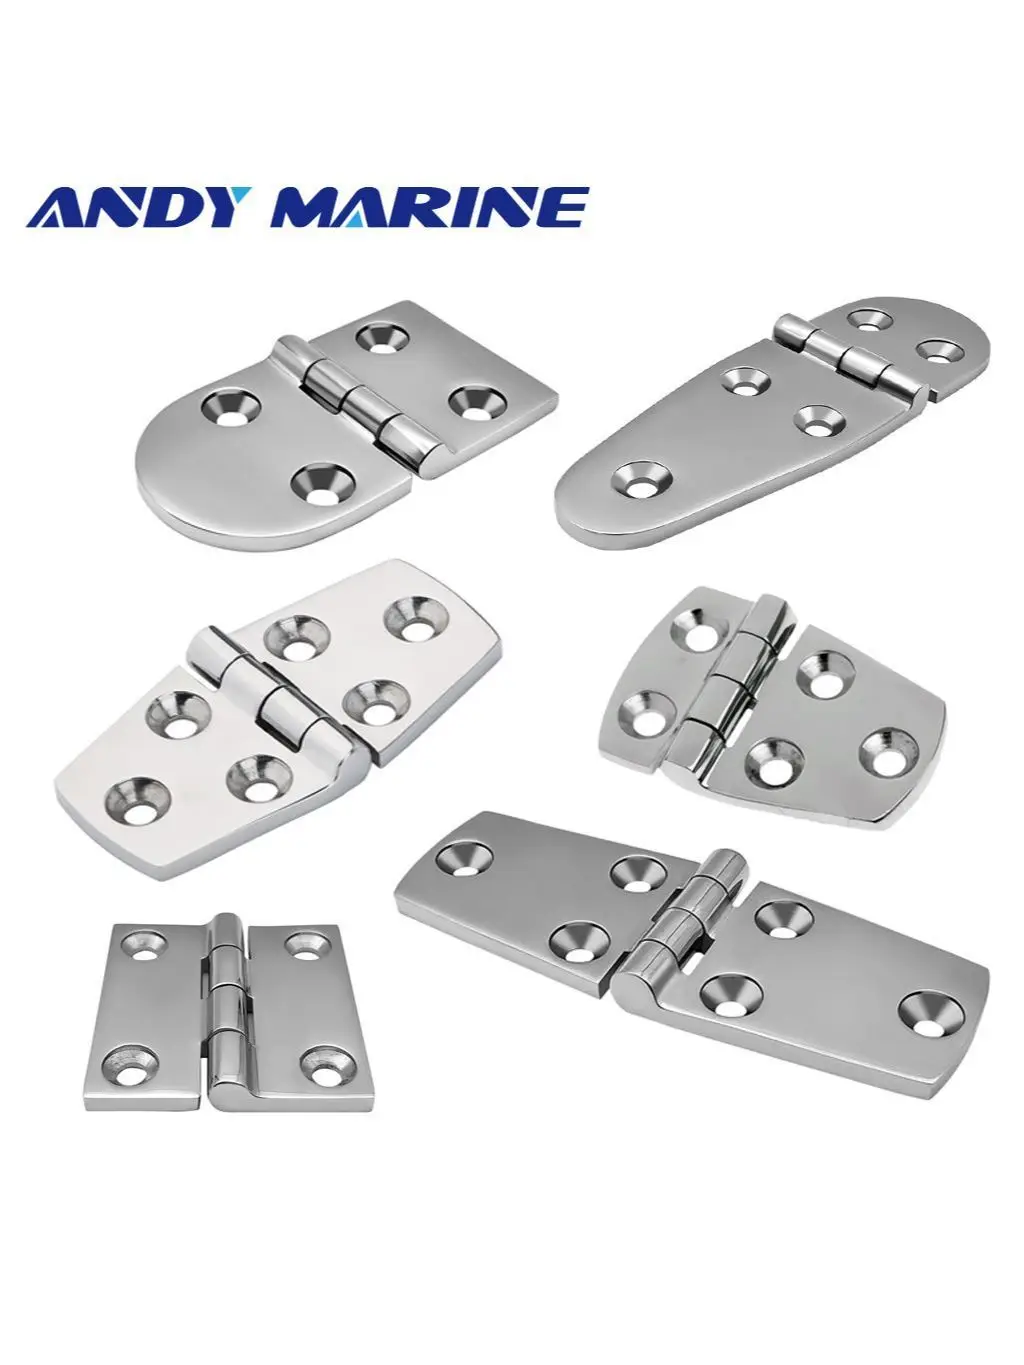 Andymarine Heavy Stainless Steel Casting Hinge Flat Hinge Cabinet Doors For Windows Hinge Wooden Box Hinge Thickness 2pcs 2 inch stainless steel flat hinge cabinet doors windows mini hinge